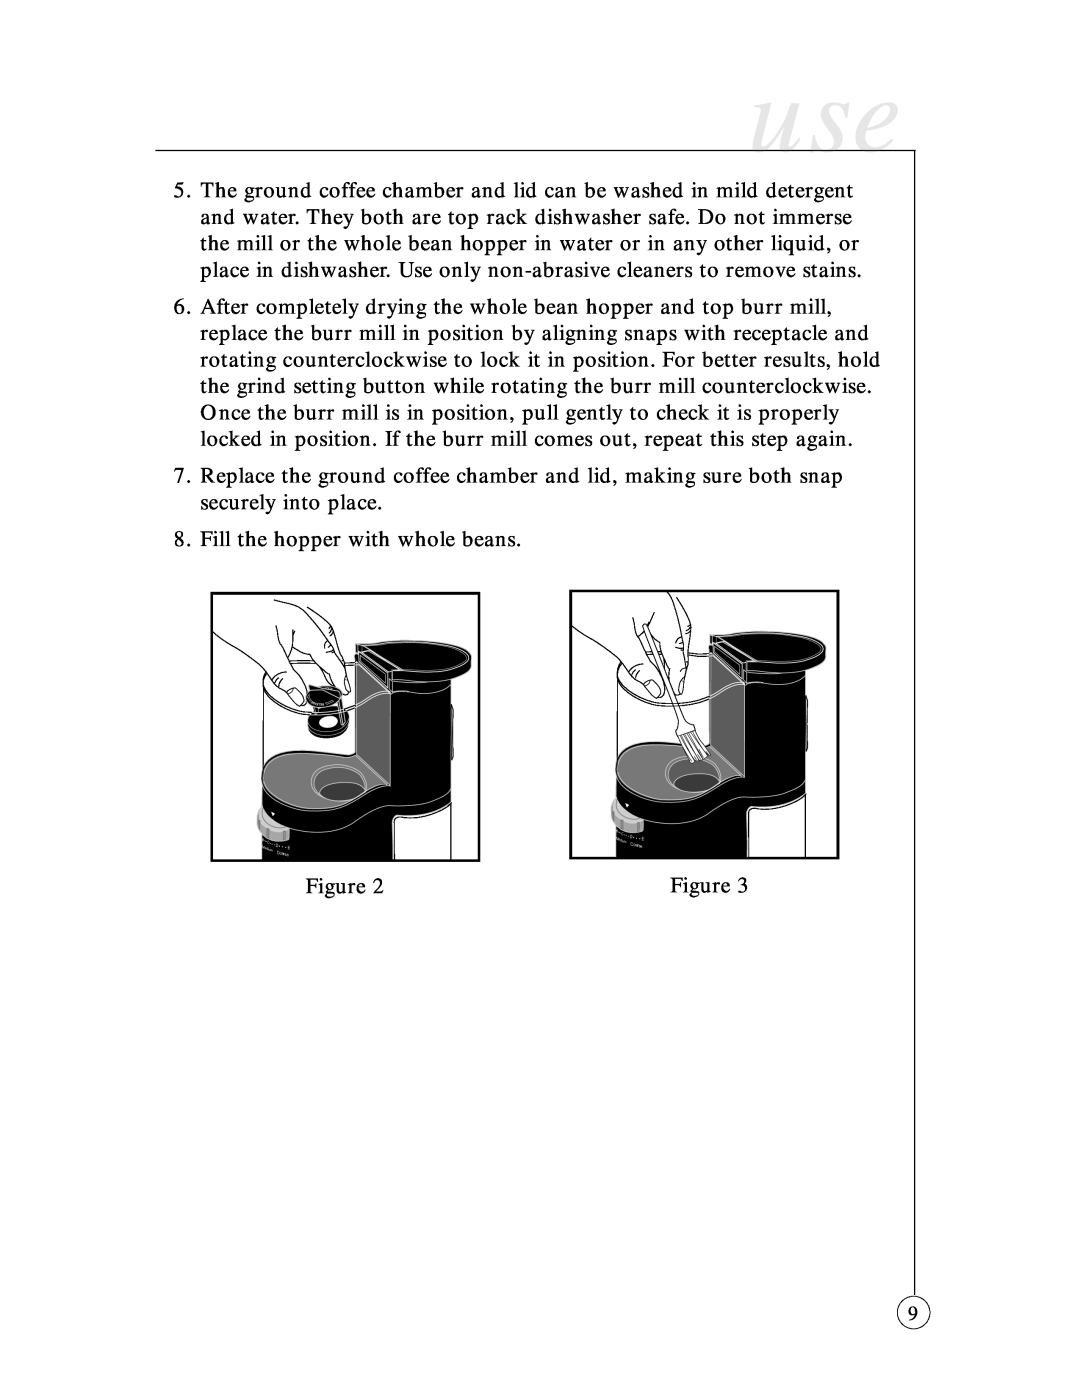 Oster 6389-33 user manual Fill the hopper with whole beans 